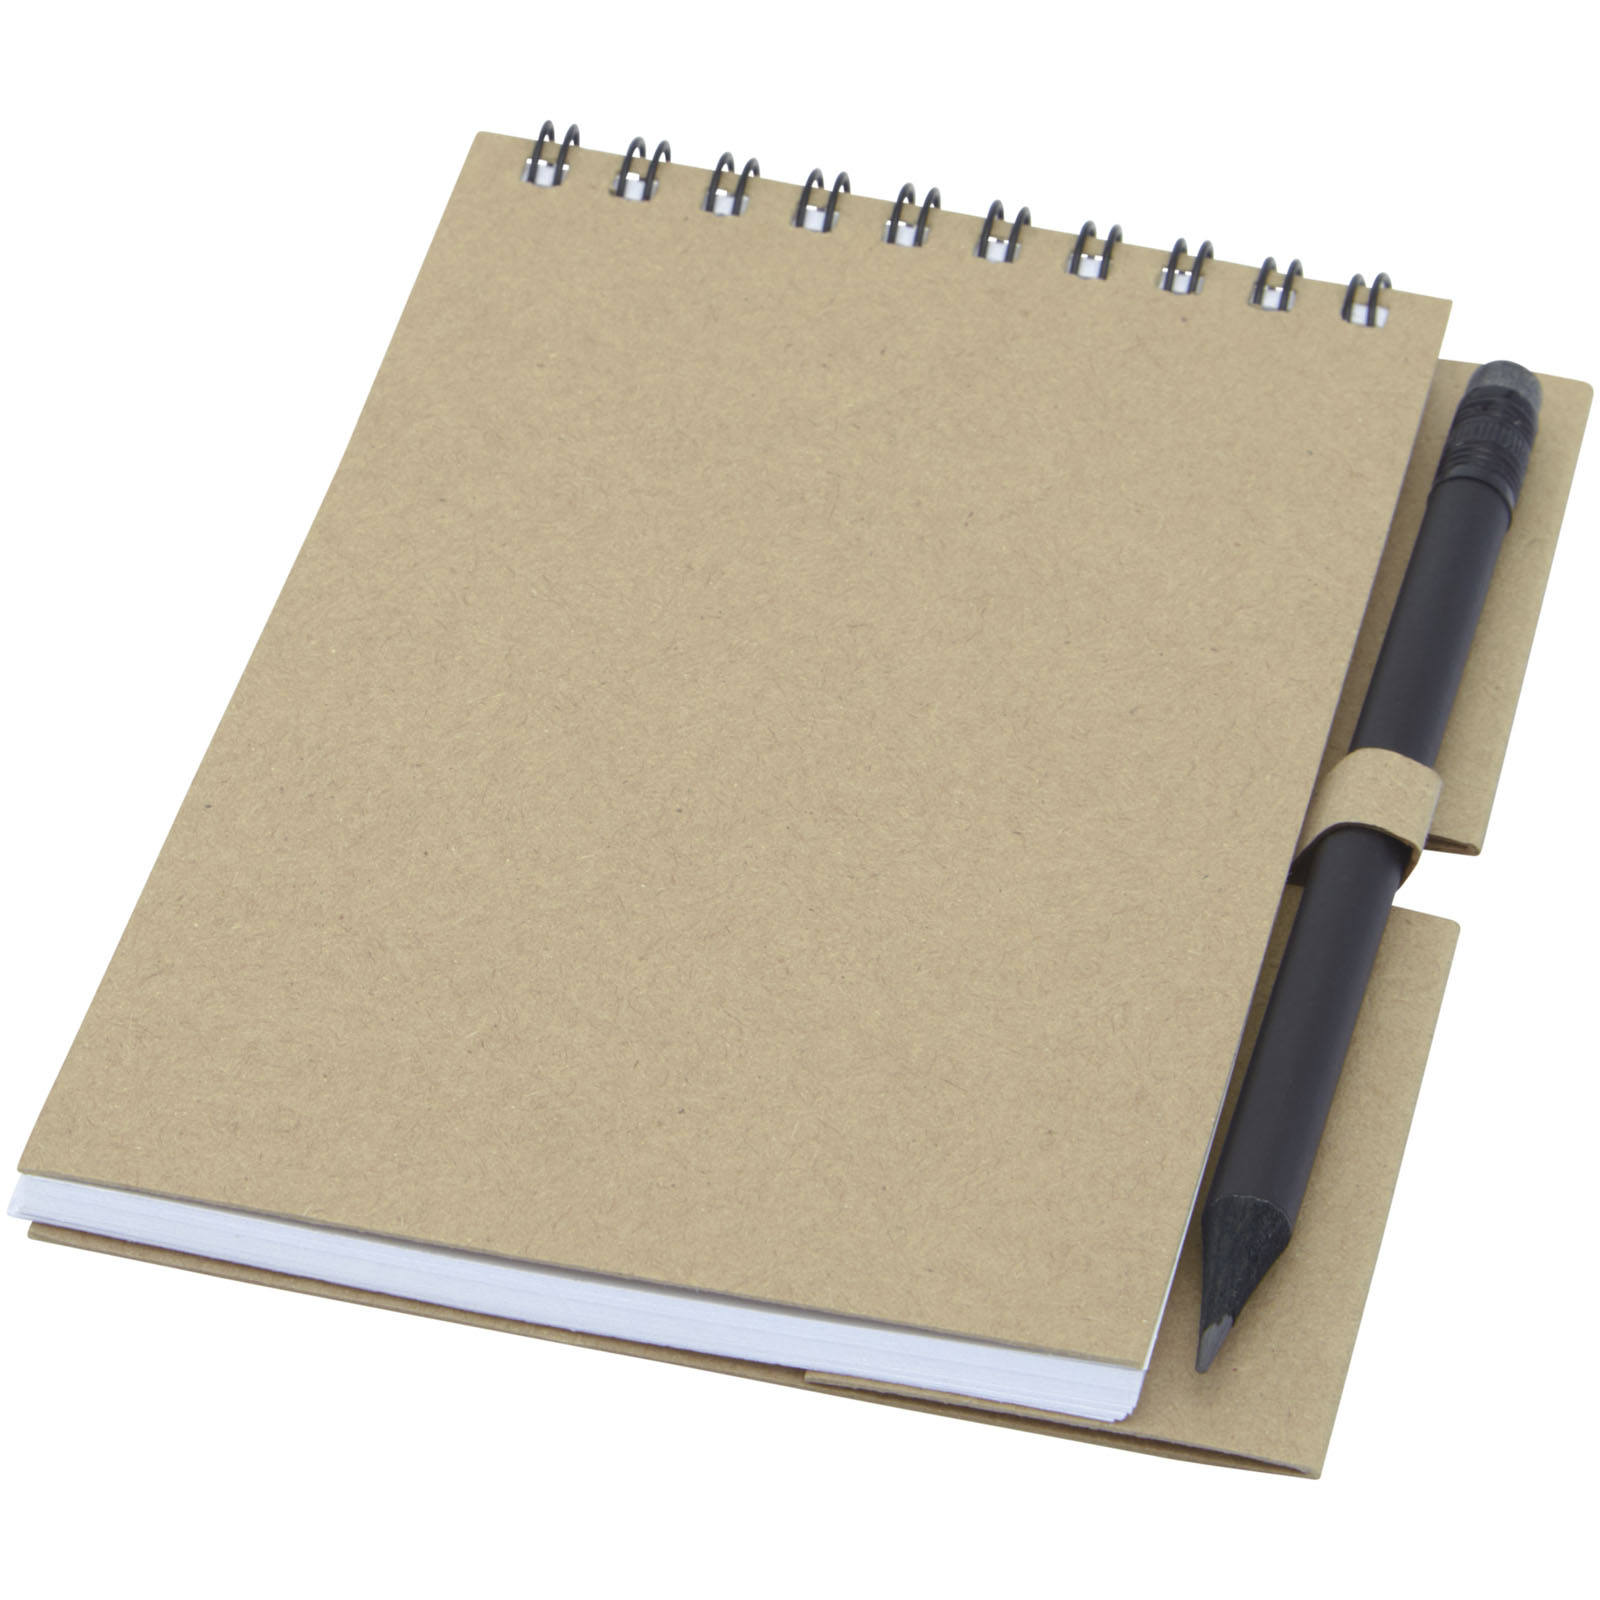 A notebook with a cover made of recycled paper and Wire-O binding, accompanied by a black pencil. - Bromsgrove